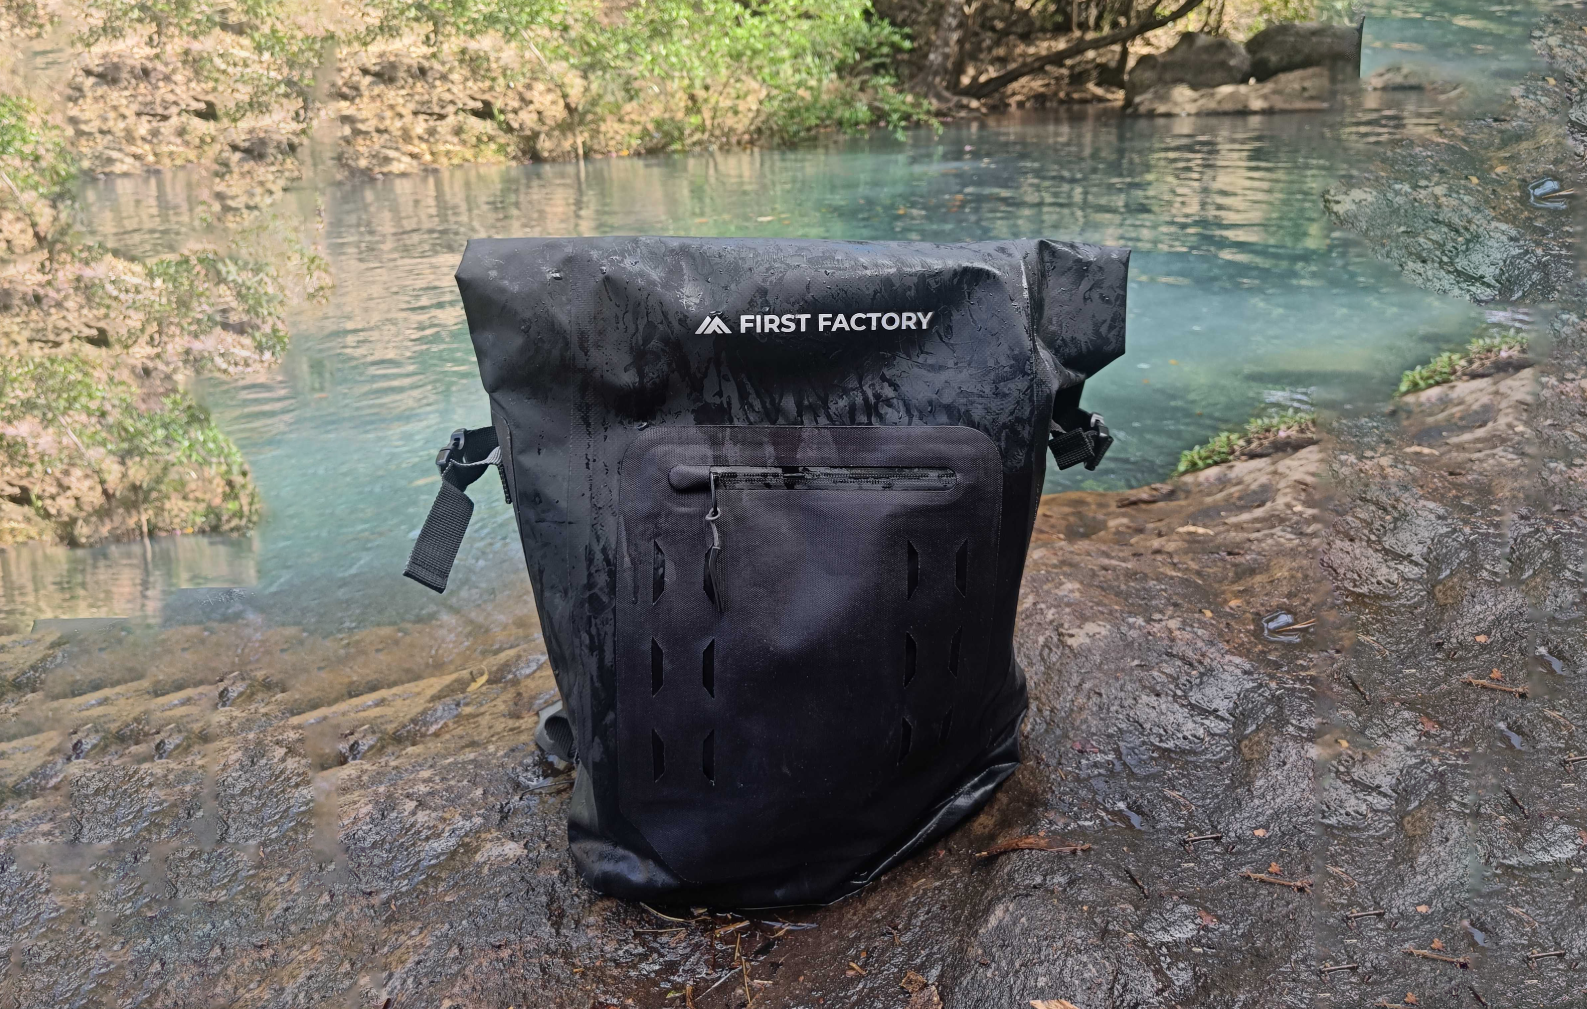 Black backpack branded with First Factory logo on rocky ground in one of Costa Rica's rivers